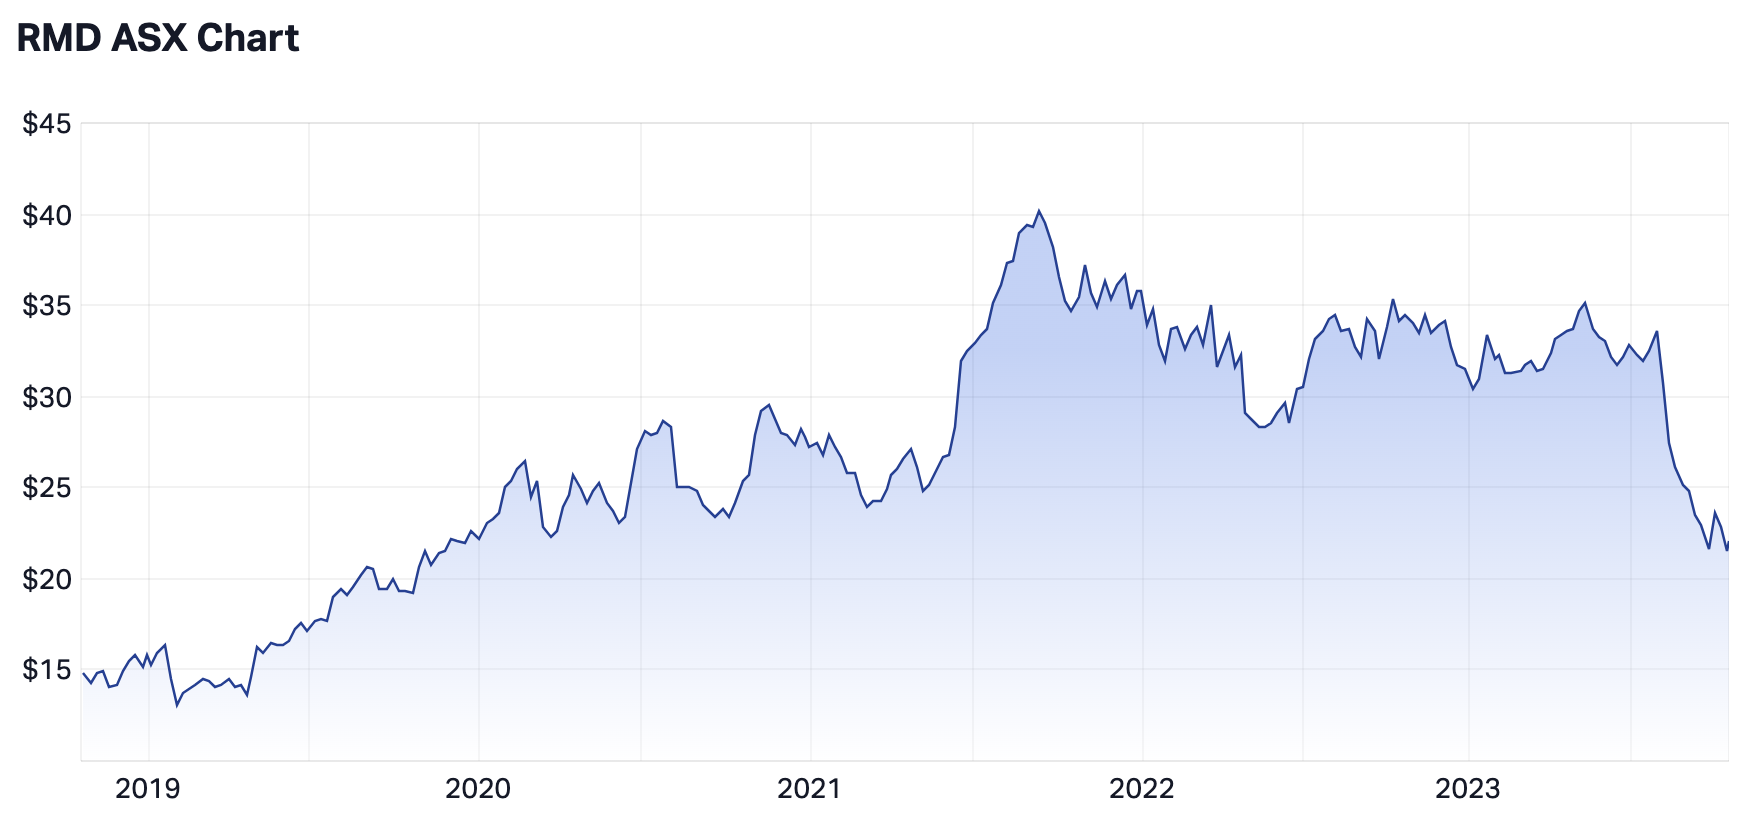 5-year performance of ResMed (Source: Market Index)
What's your burning question?Drop us a line in the comments to let us know your biggest questions about markets currently. Better still, let us know what stocks you're buying (or selling) amid persistent uncertainty.